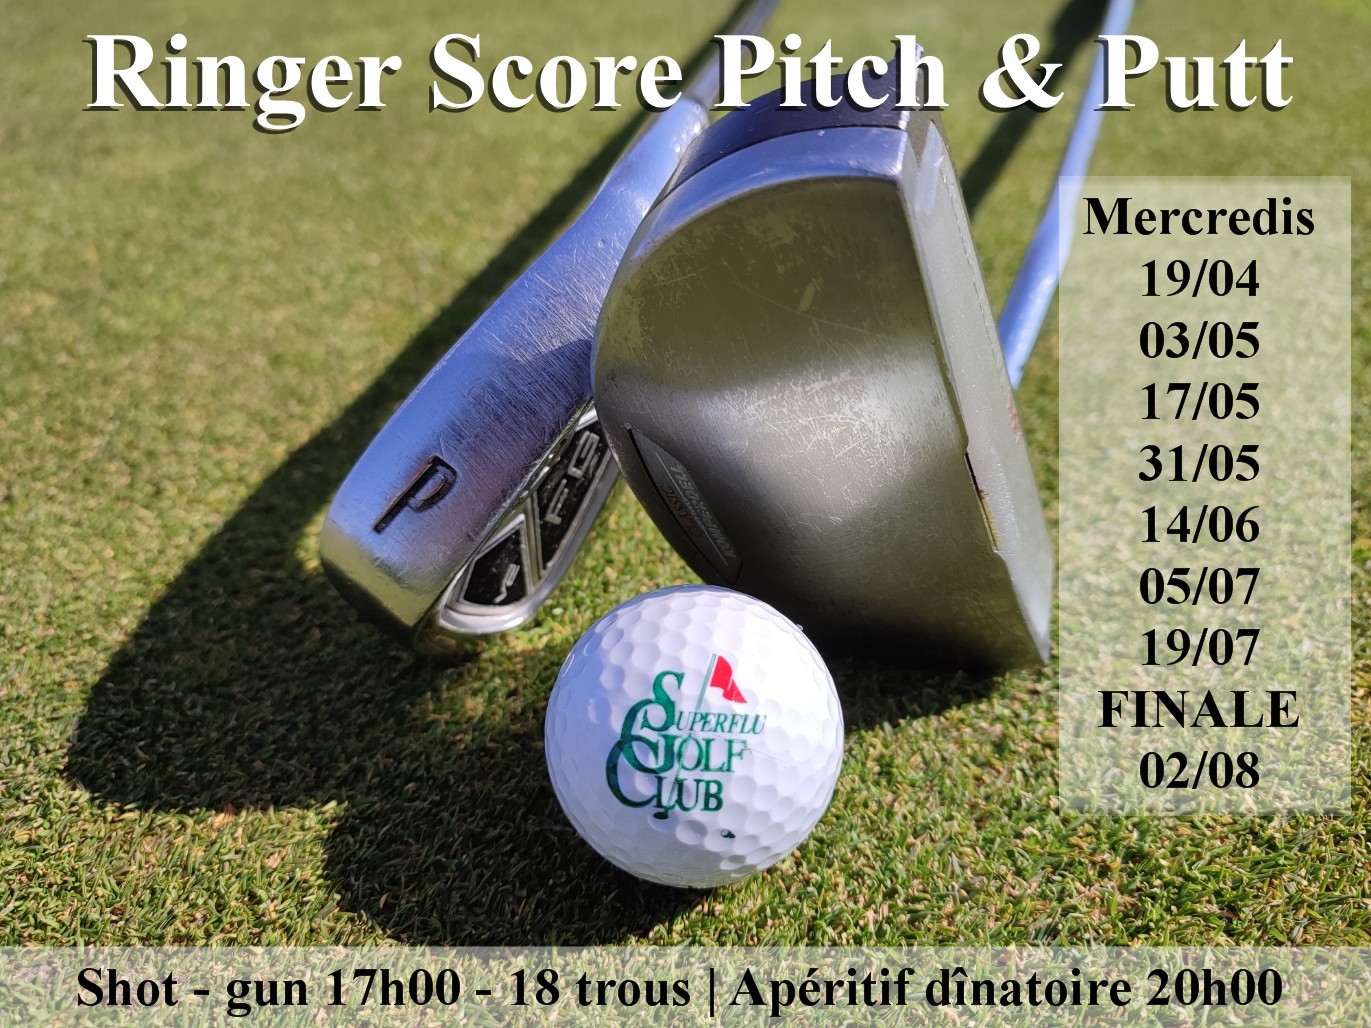 RINGER SCORE PITCH AND PUTT